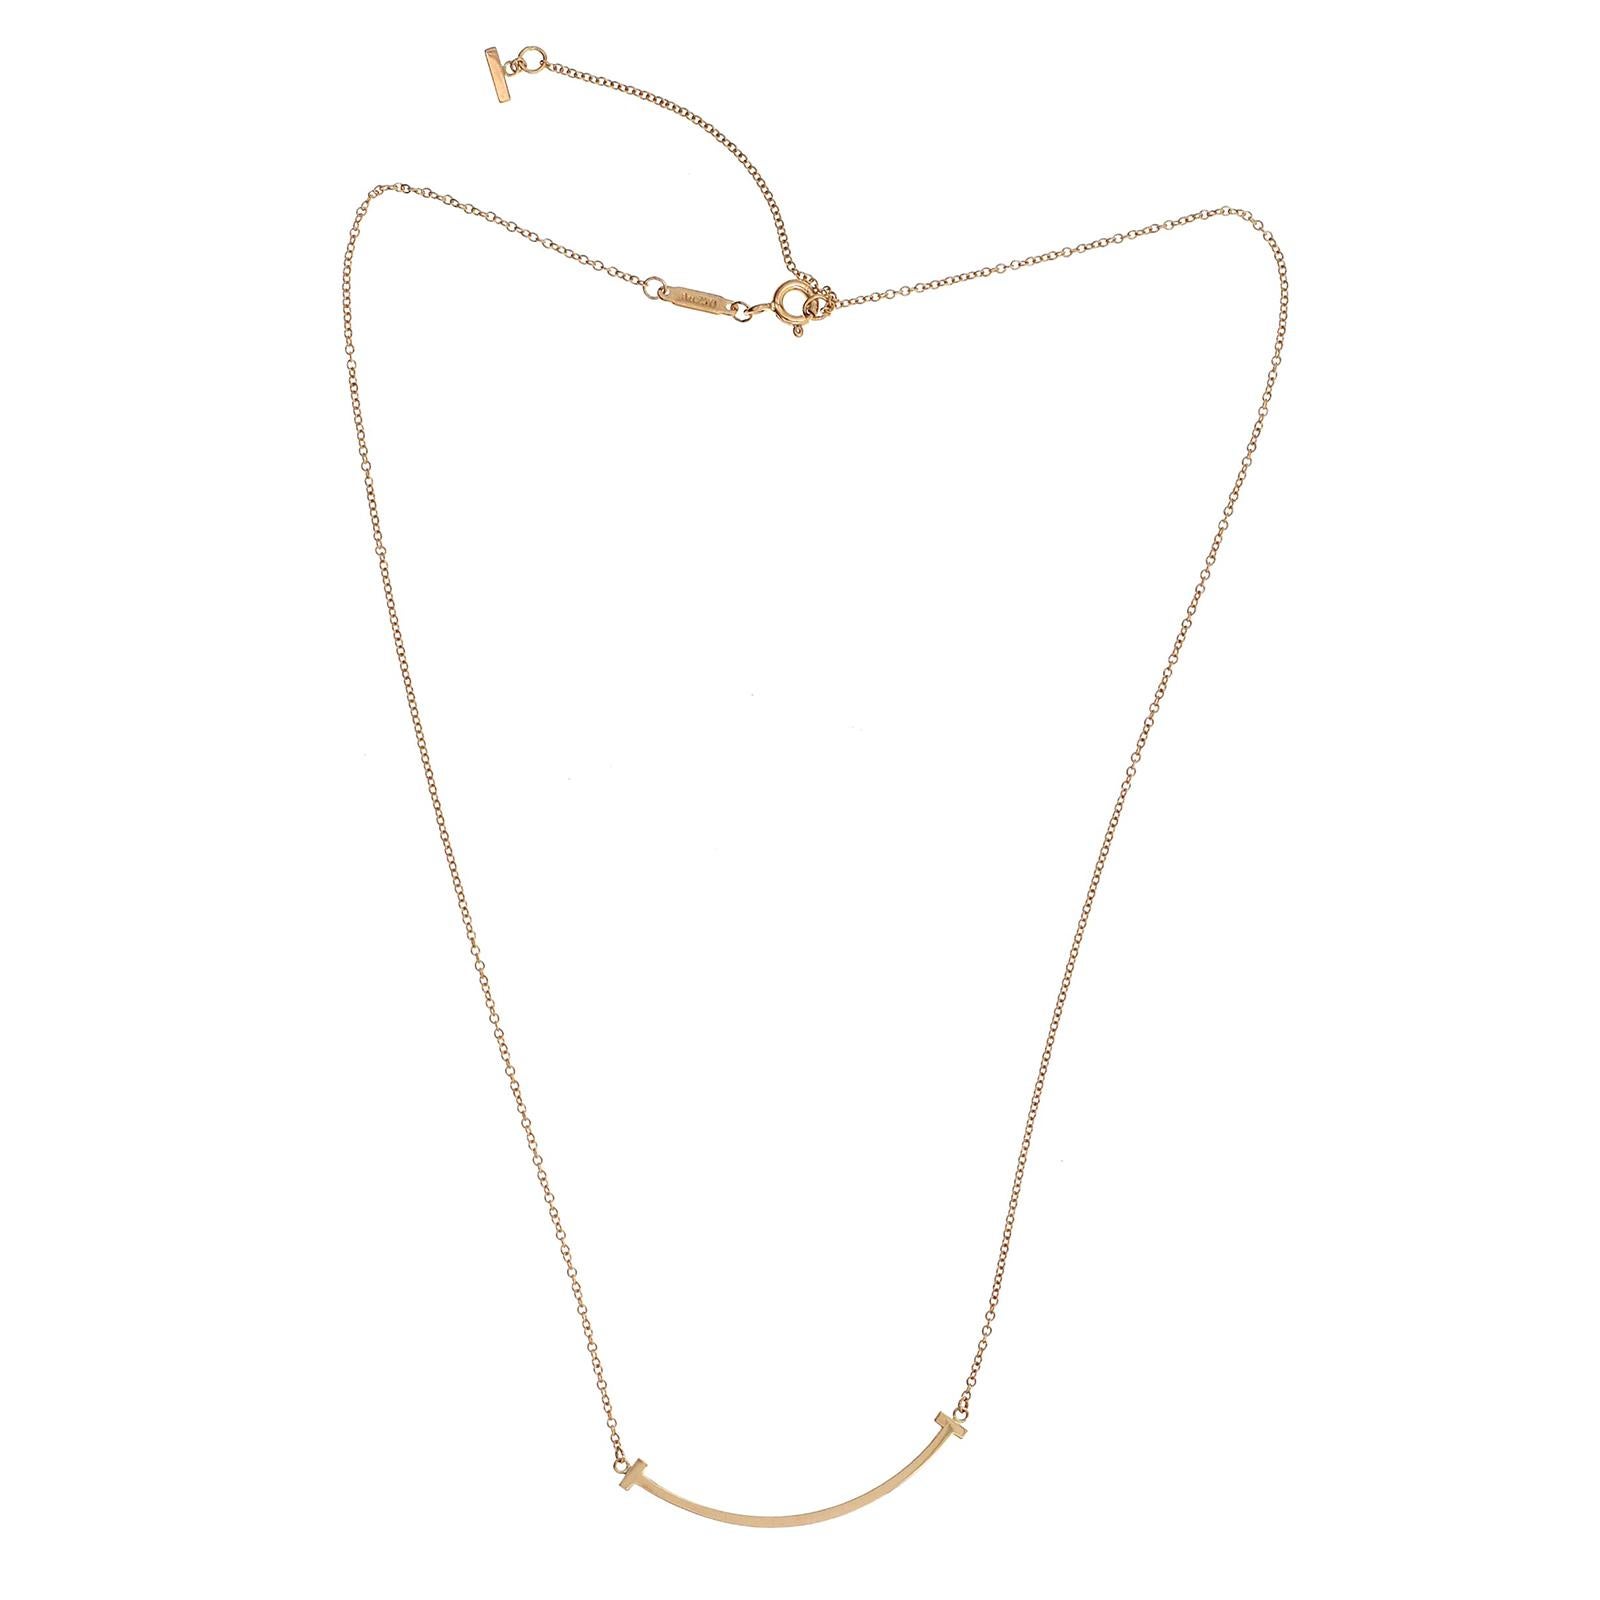 Authentic Tiffany and Co. 18 Karat Rose Gold T Smile Necklace For Sale ...